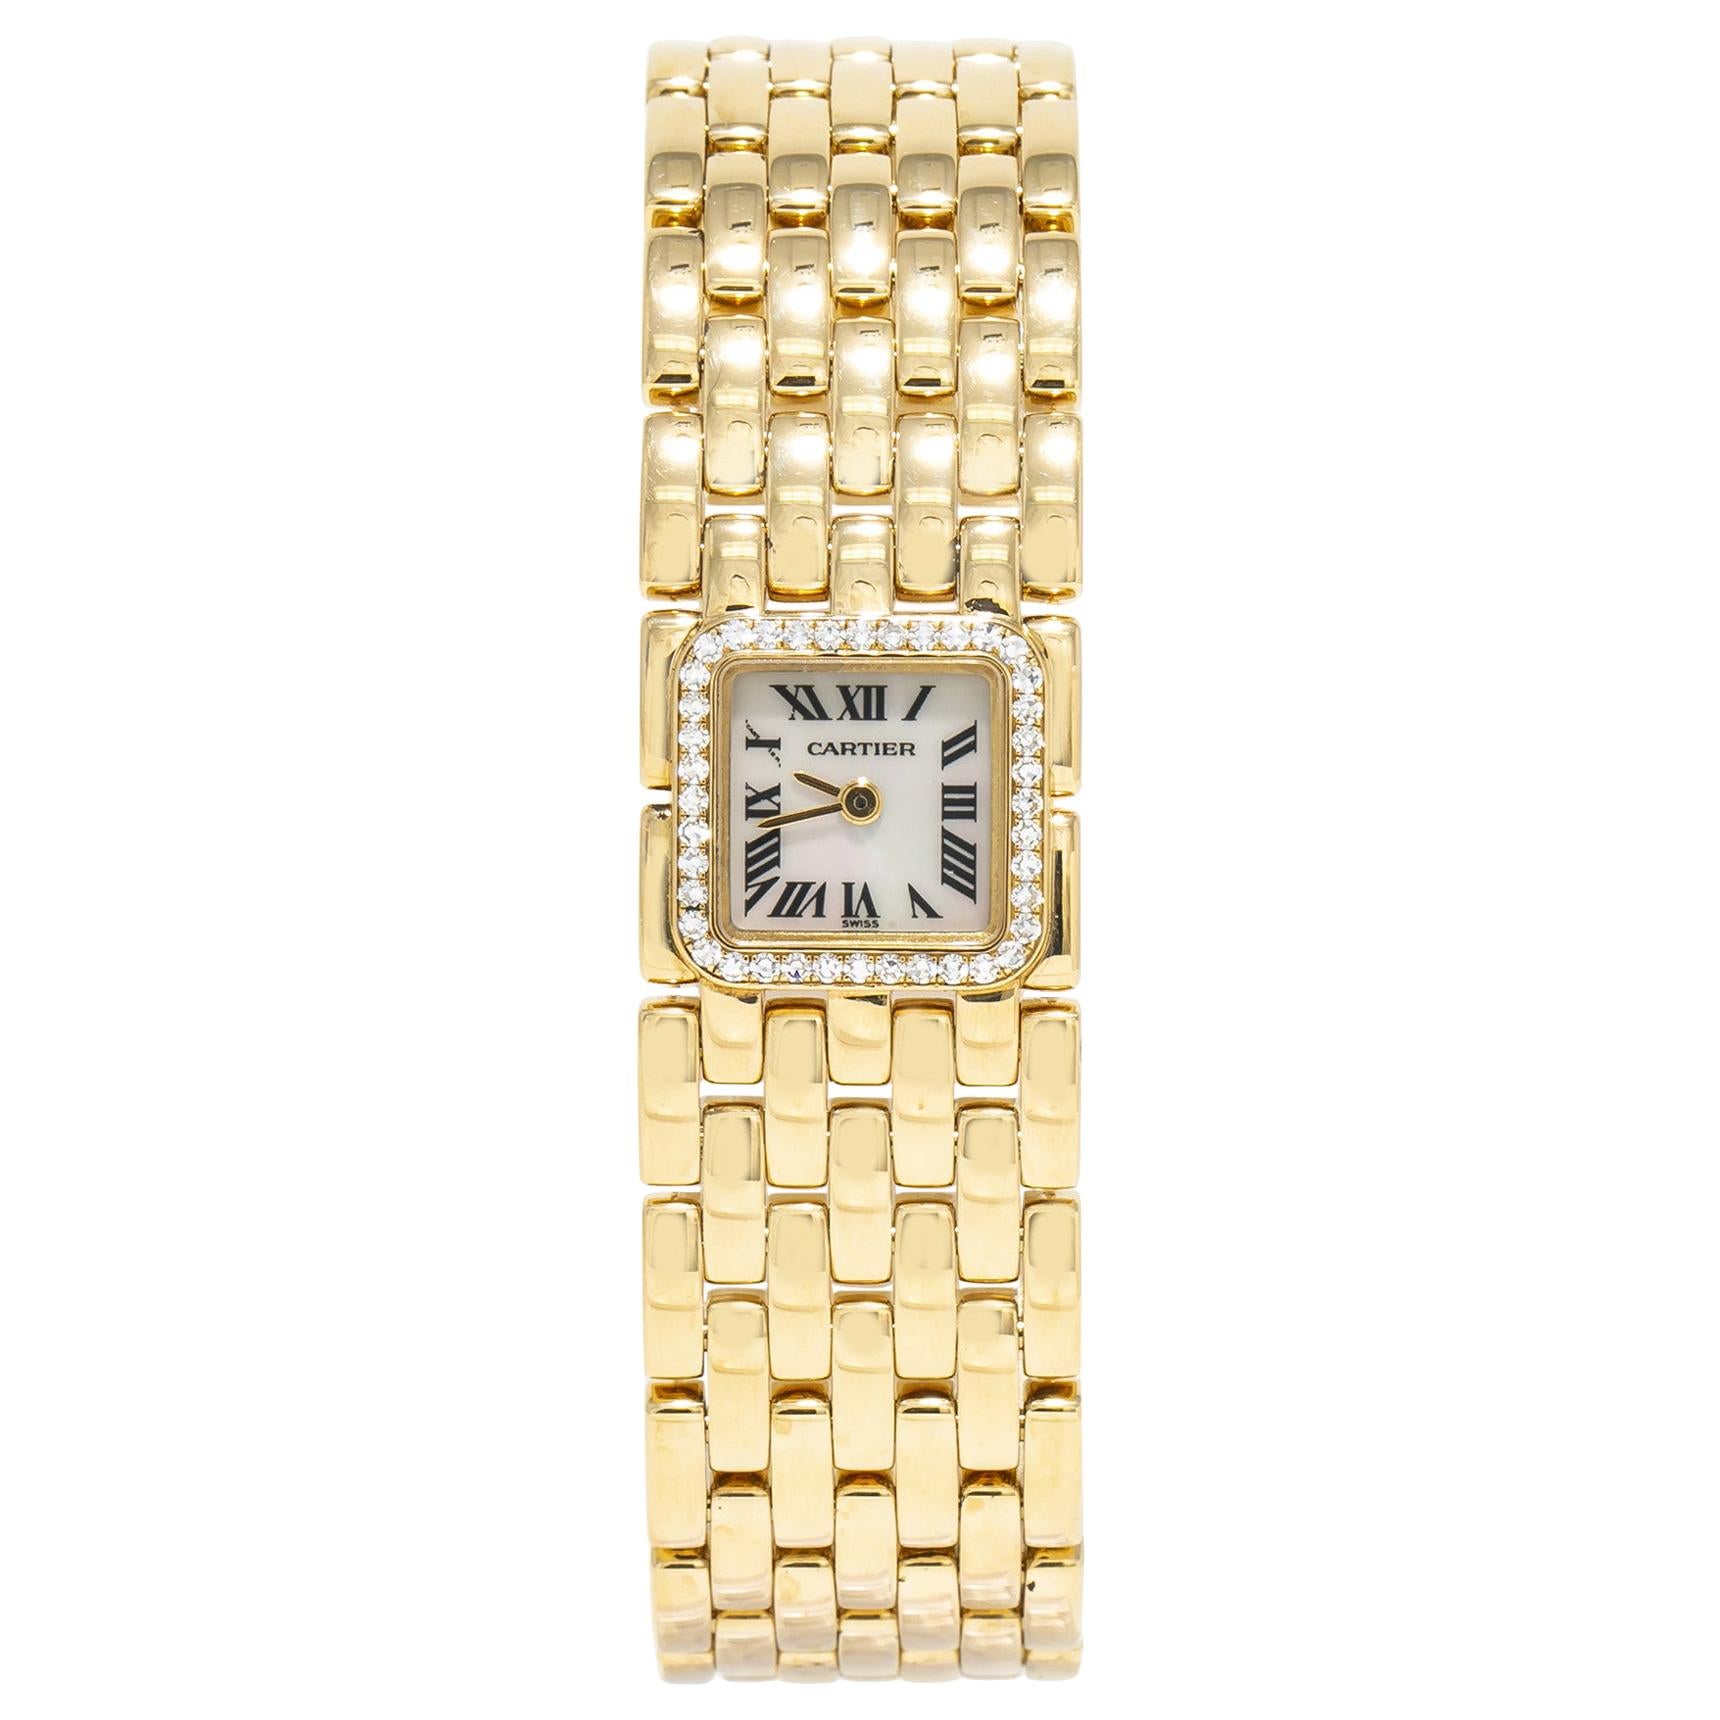 Cartier Panthere Ruban 2421, Mother of Pearl Dial, Certified